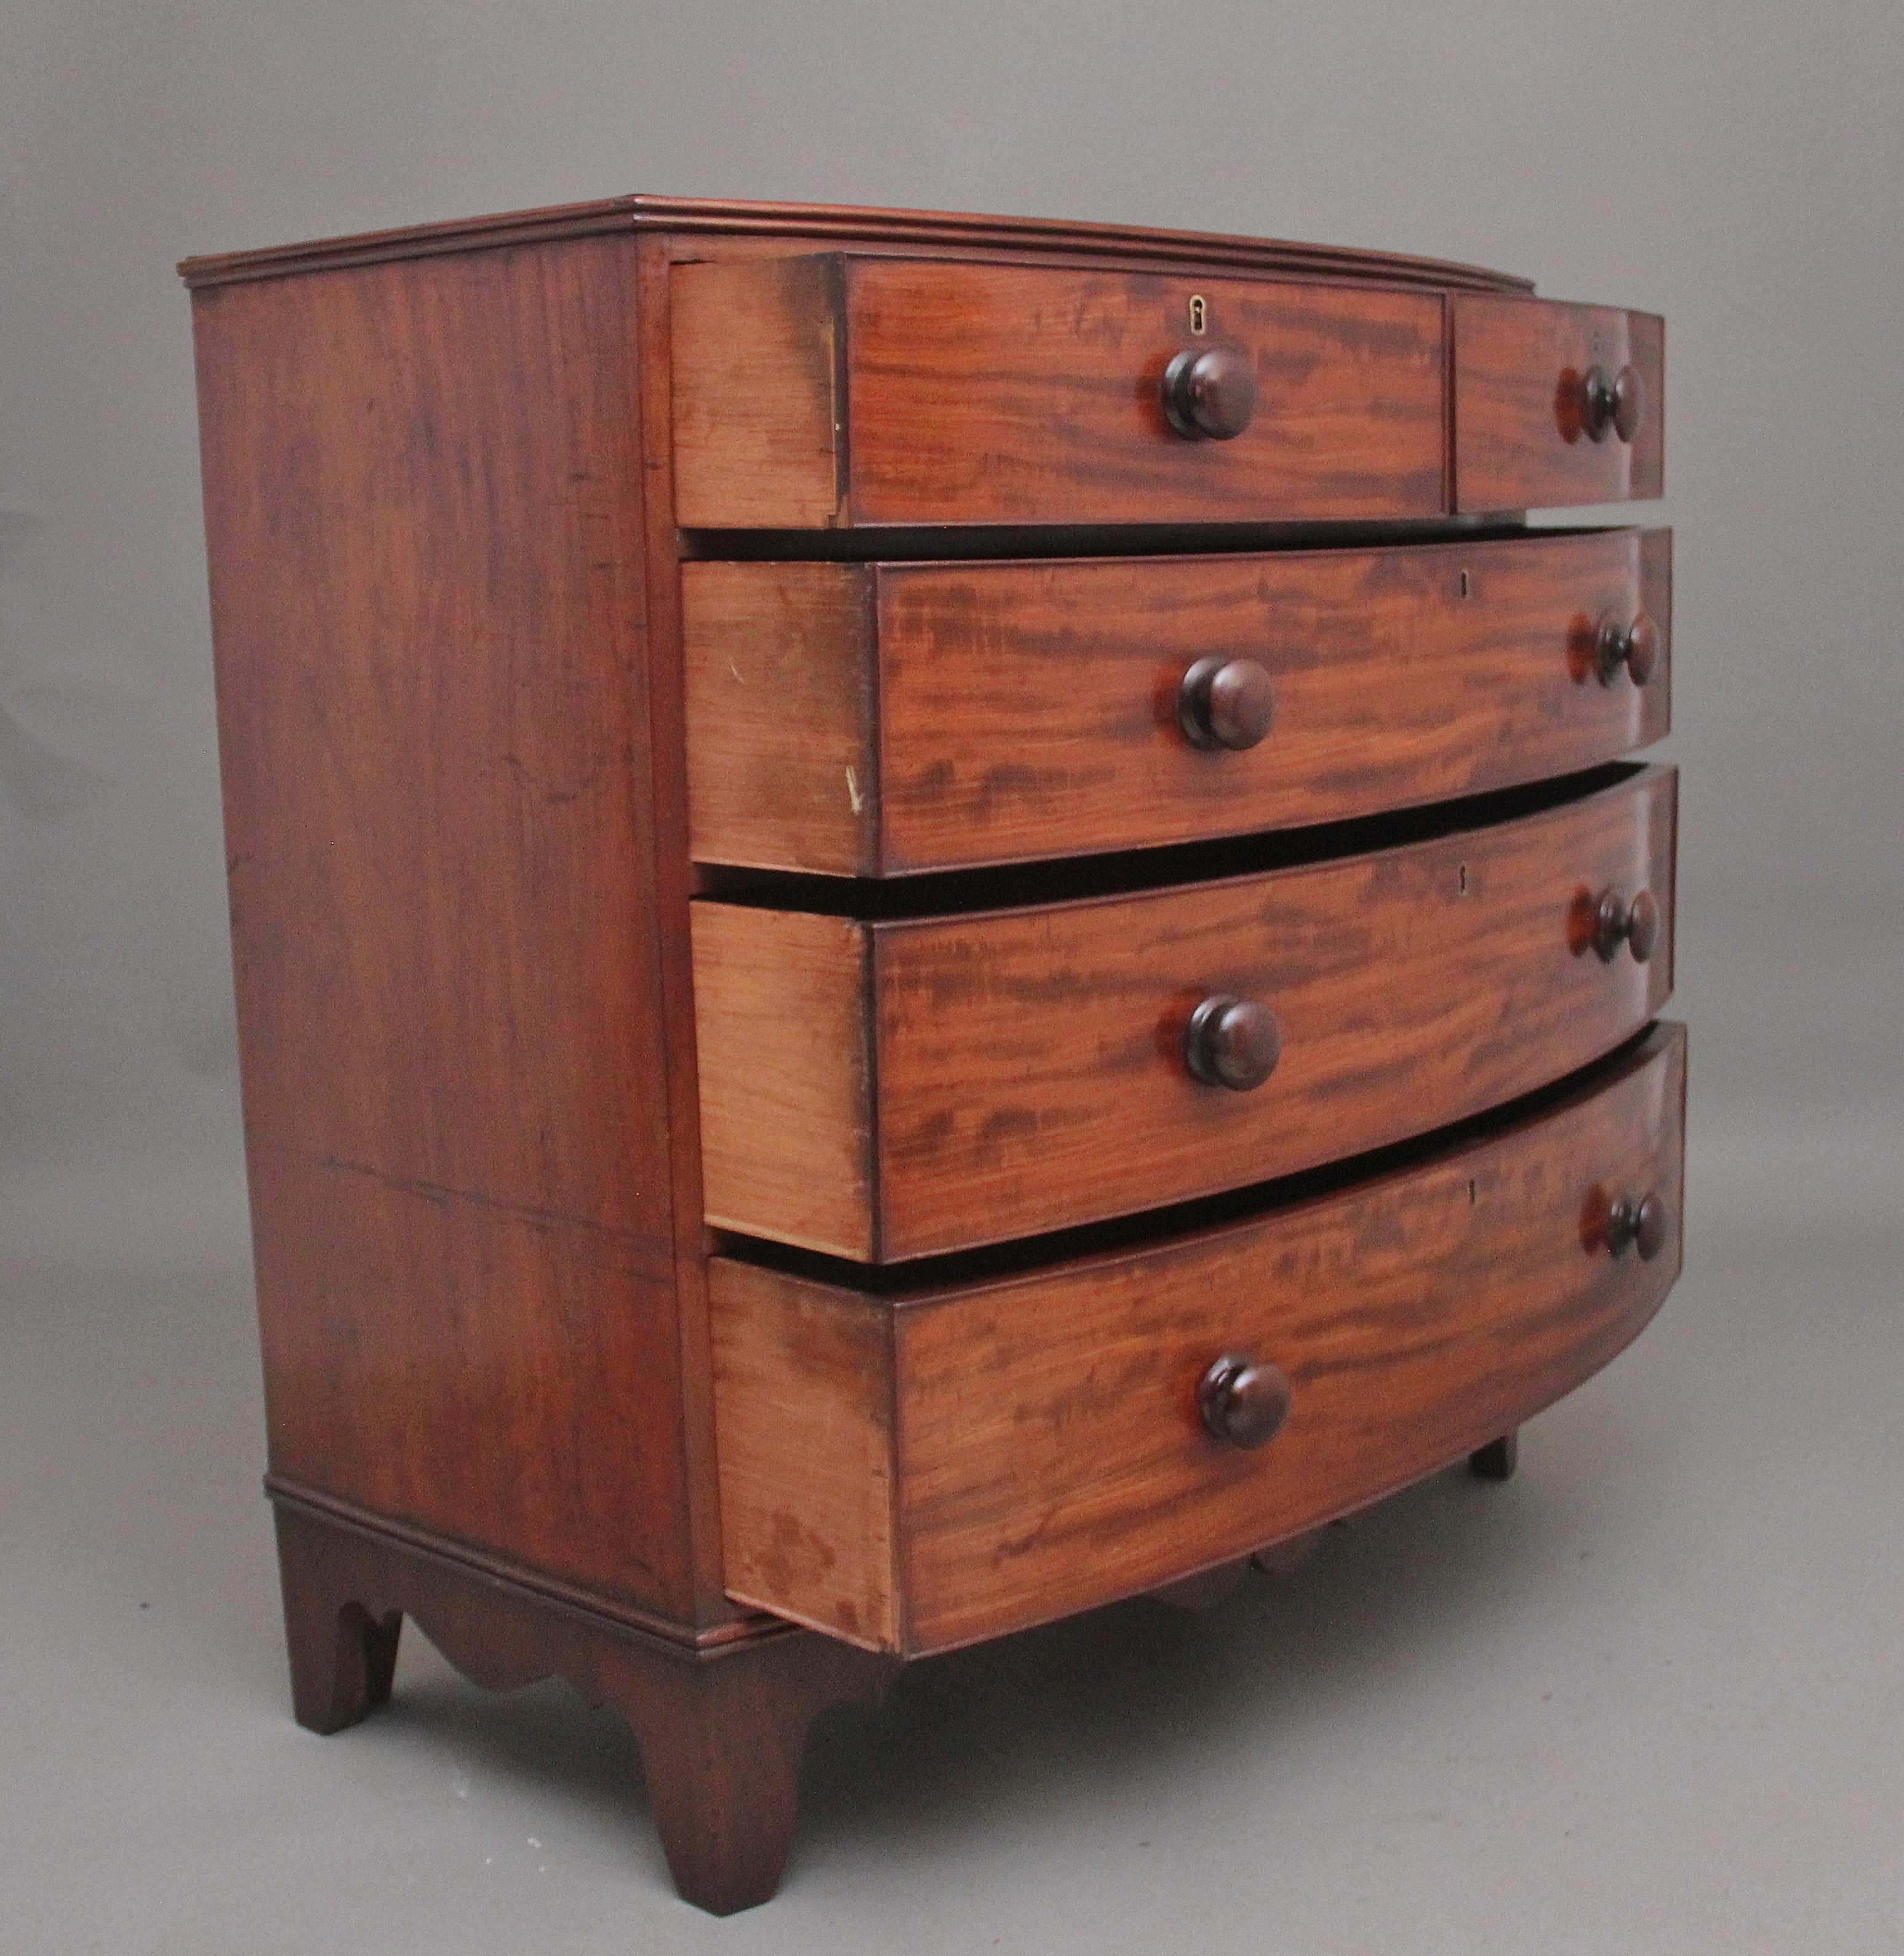 British Early 19th Century mahogany bowfront chest of drawers